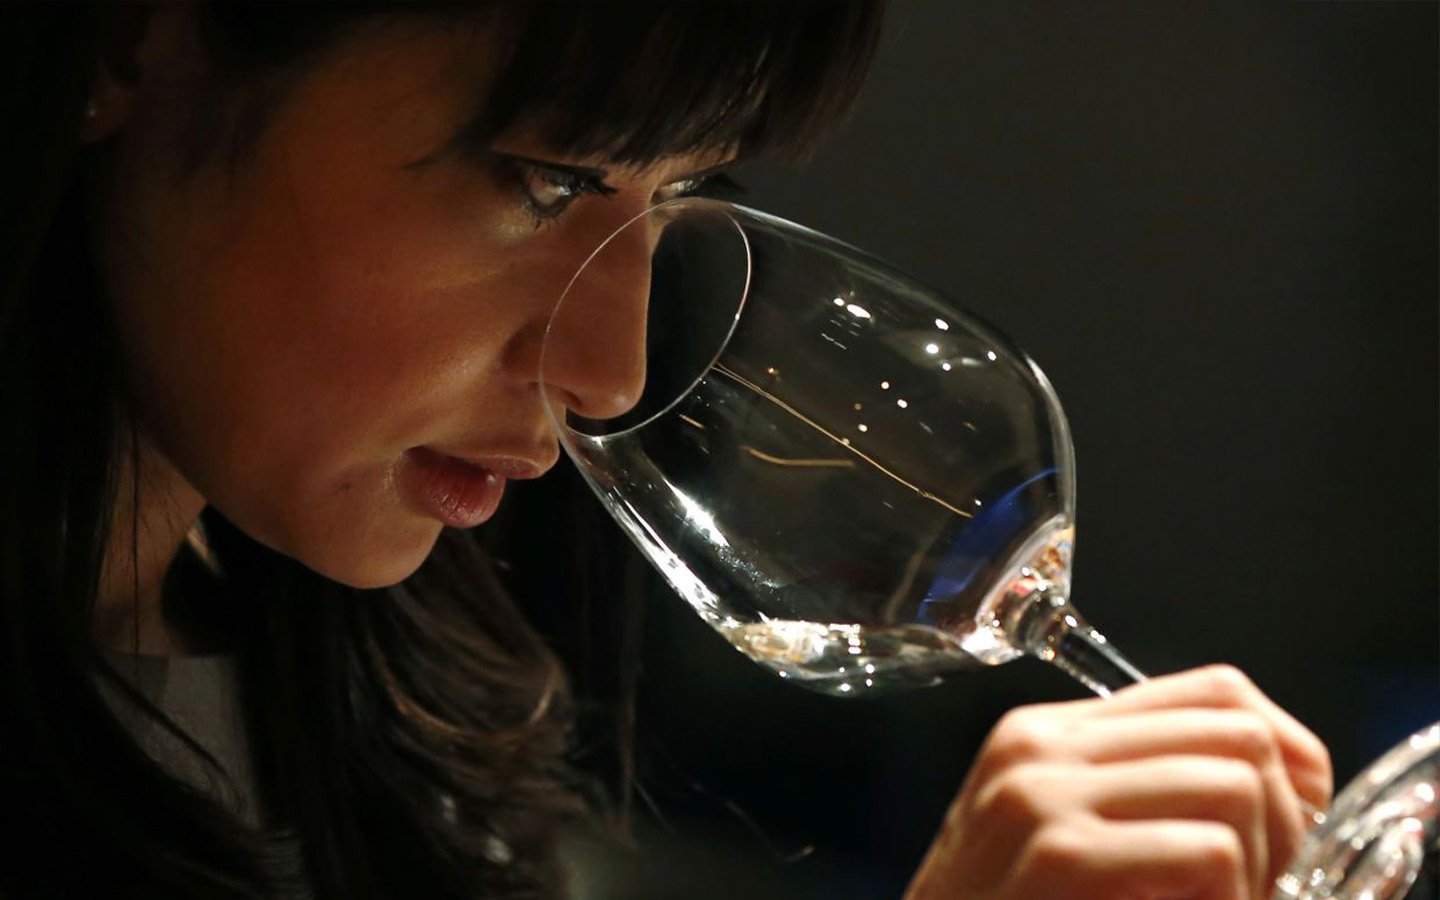 Portuguese wine is gaining fans in Japan and South Korea